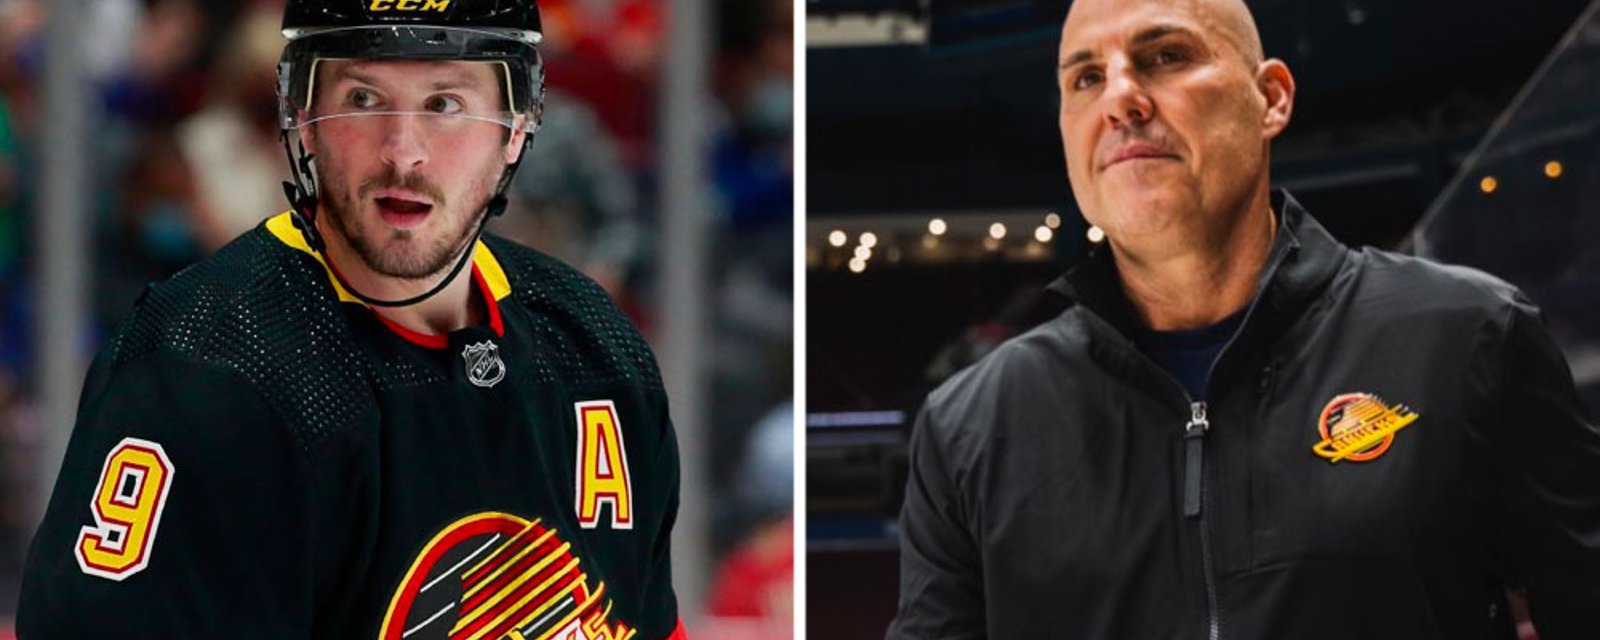 Rumor: JT Miller reportedly at the center of Boudreau firing and Tocchet hiring